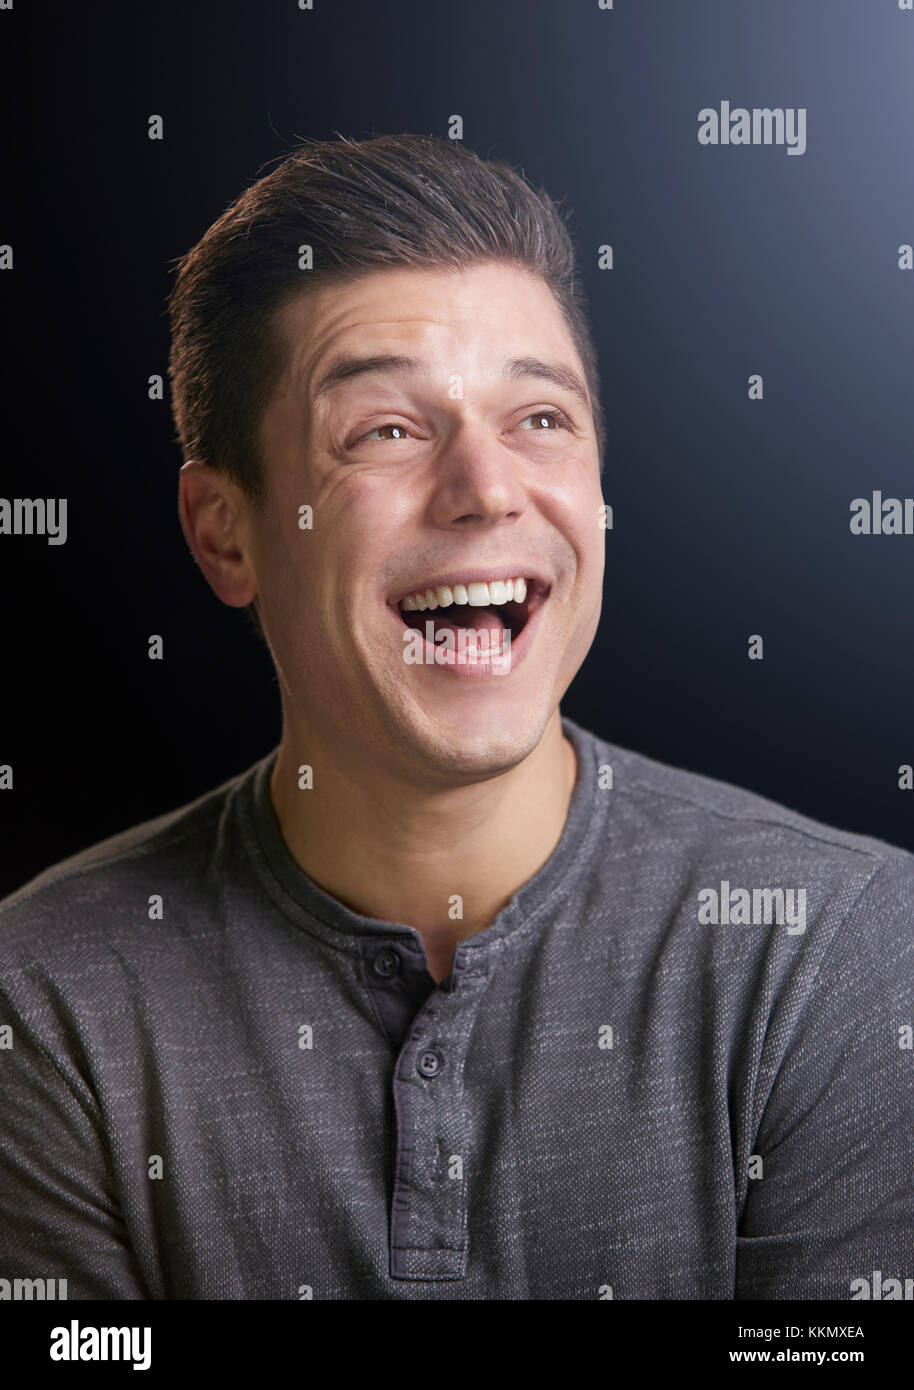 Laughing young man looking up, vertical portrait Stock Photo